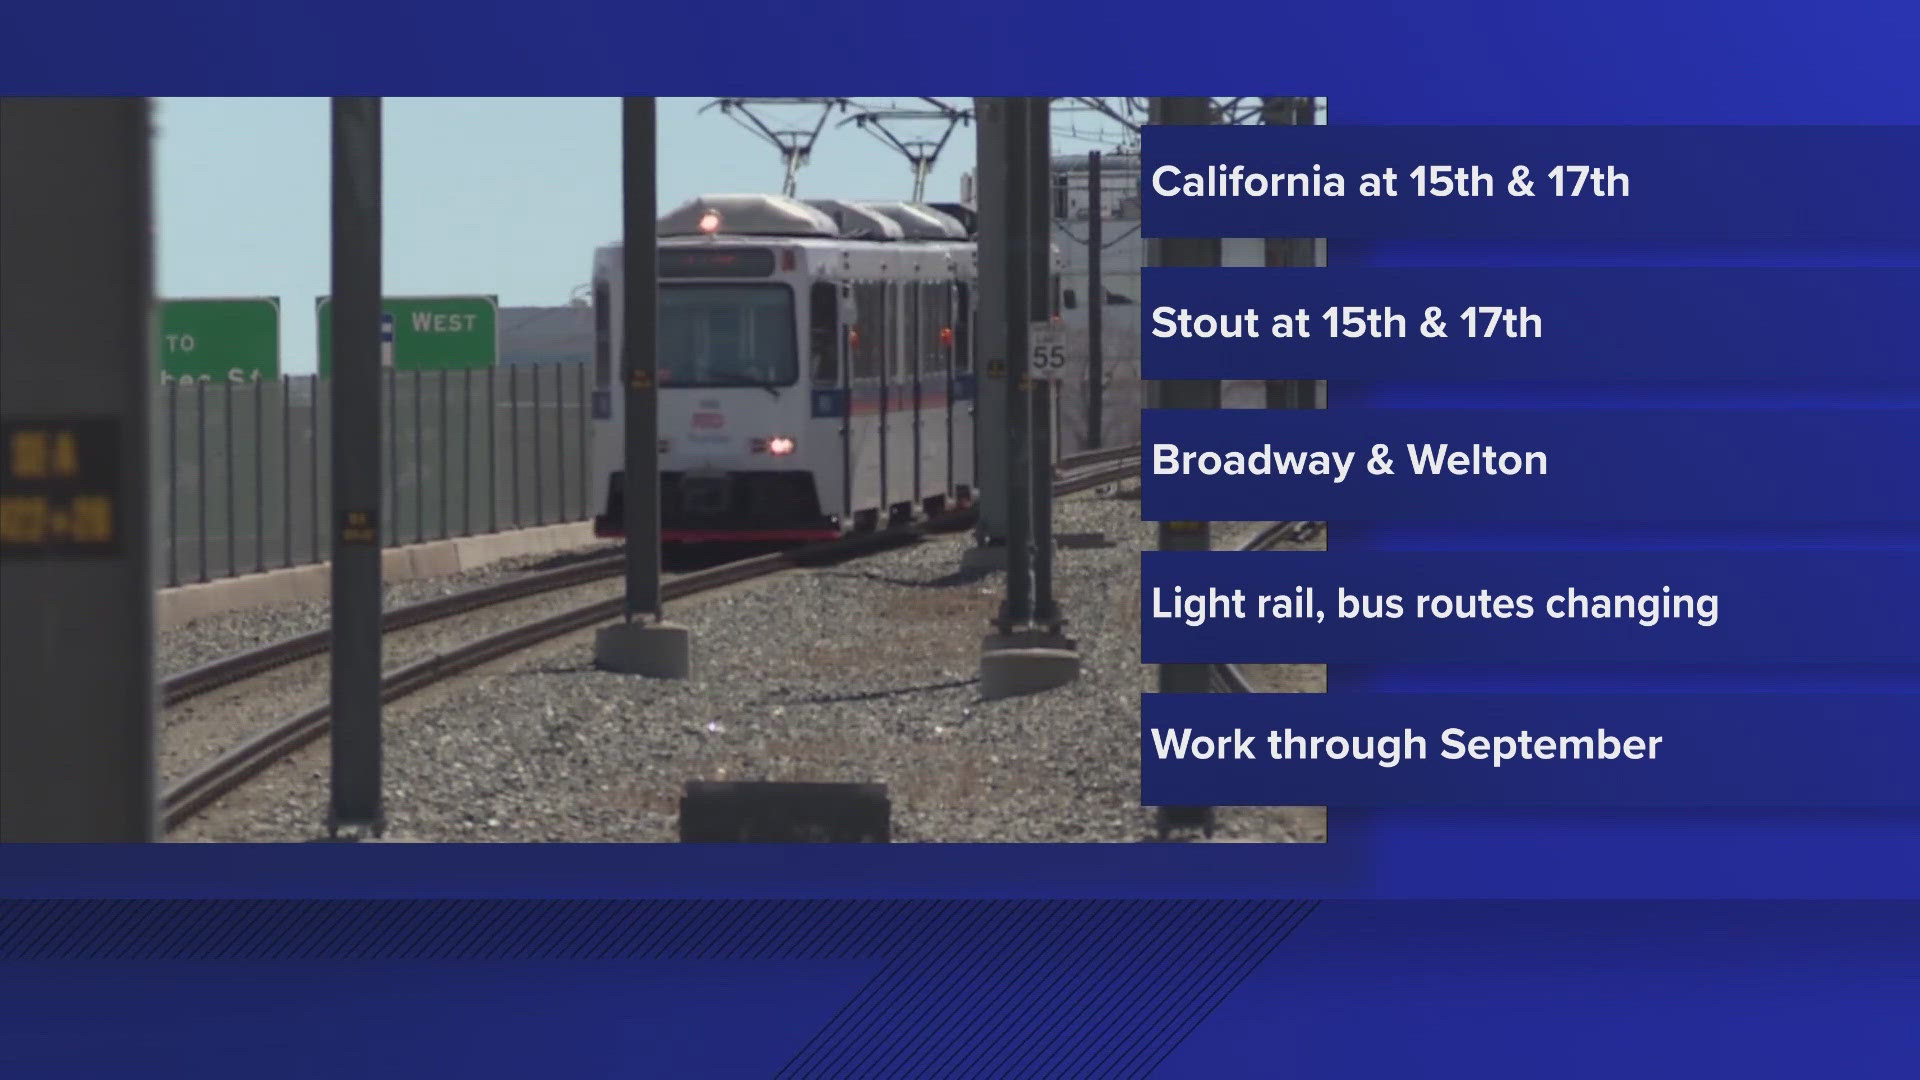 RTD says they've made repairs over the years but with recent track inspections, they've noticed the integrity of the infrastructure is deteriorating.